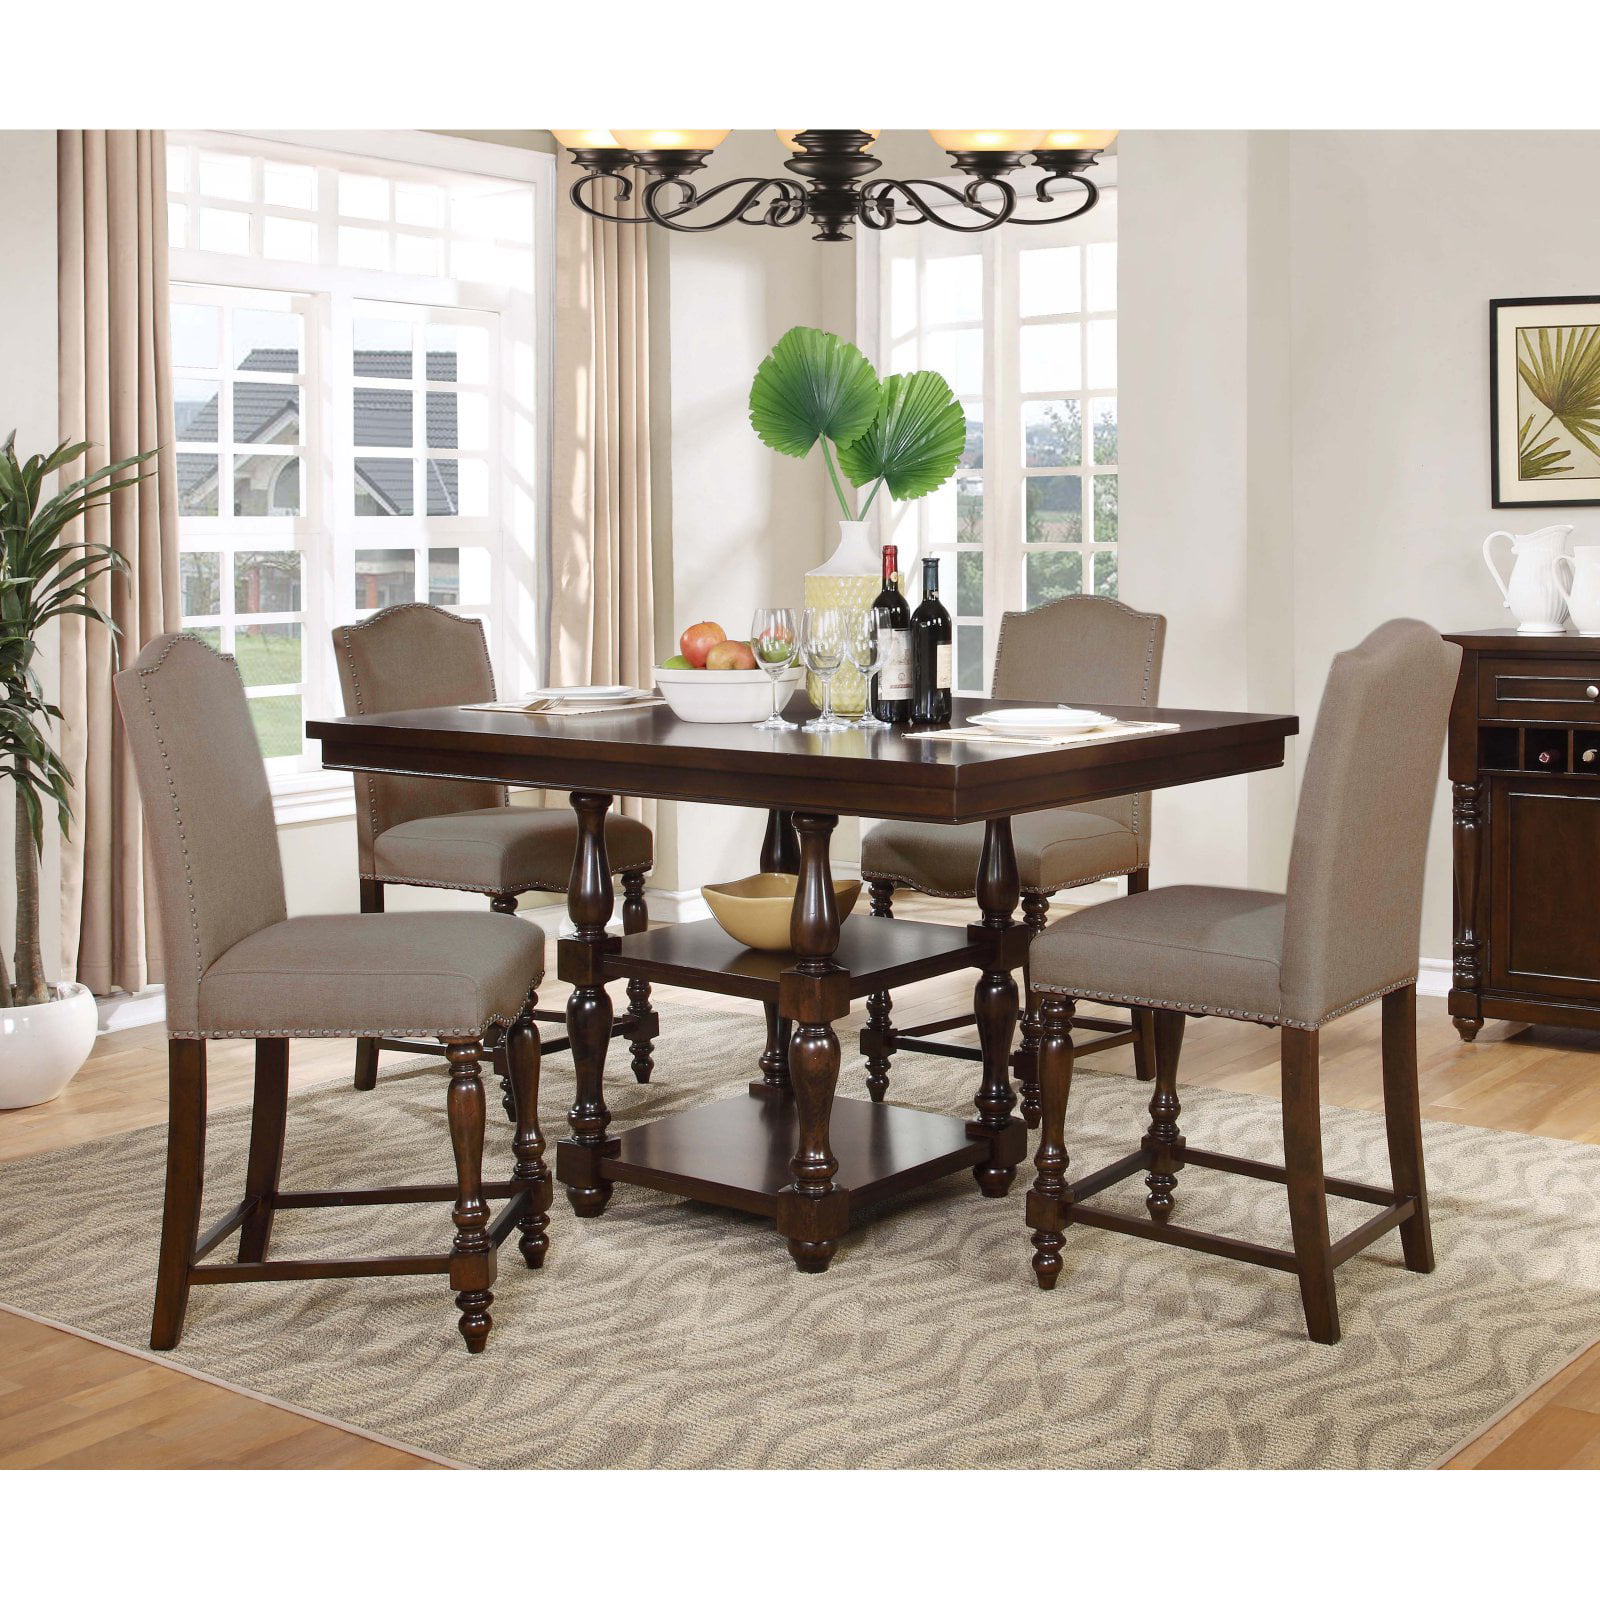 Unique Walmart Dining Set for Small Space